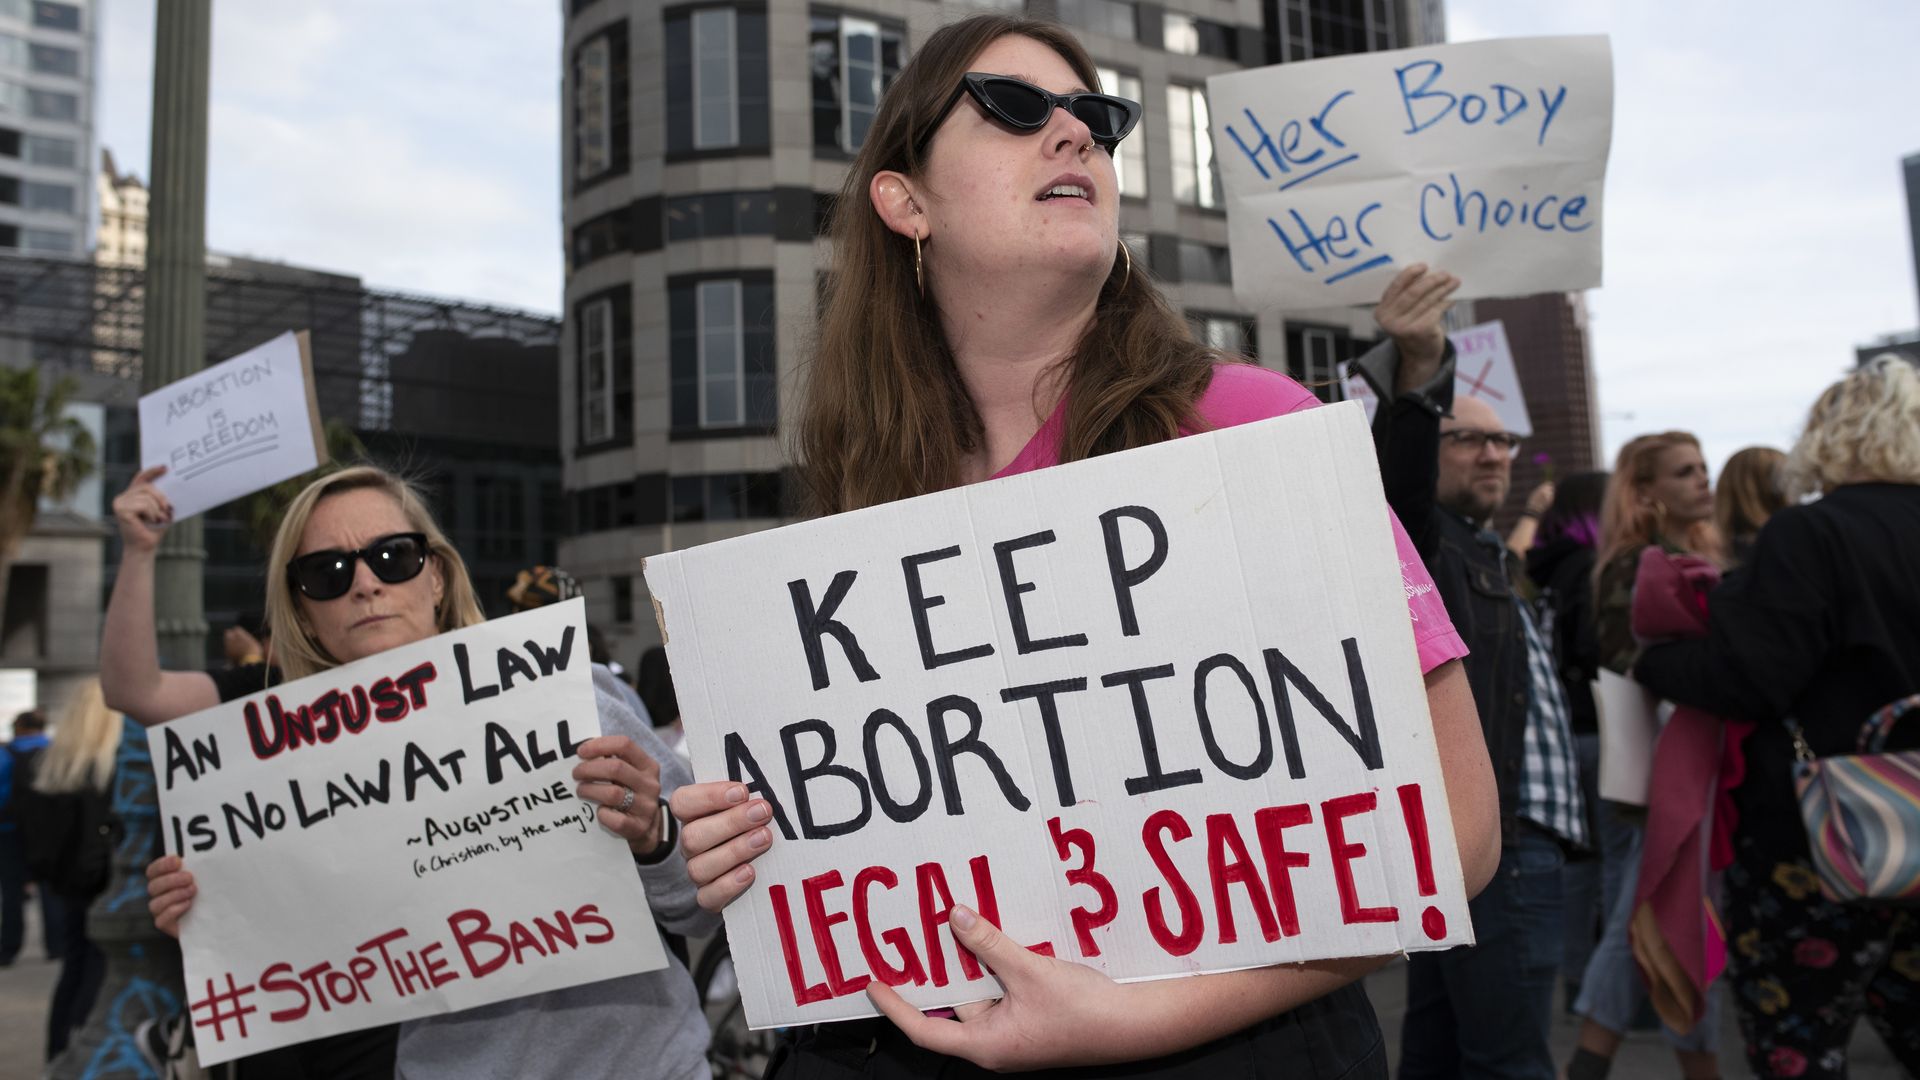 Abortion activists holding signs